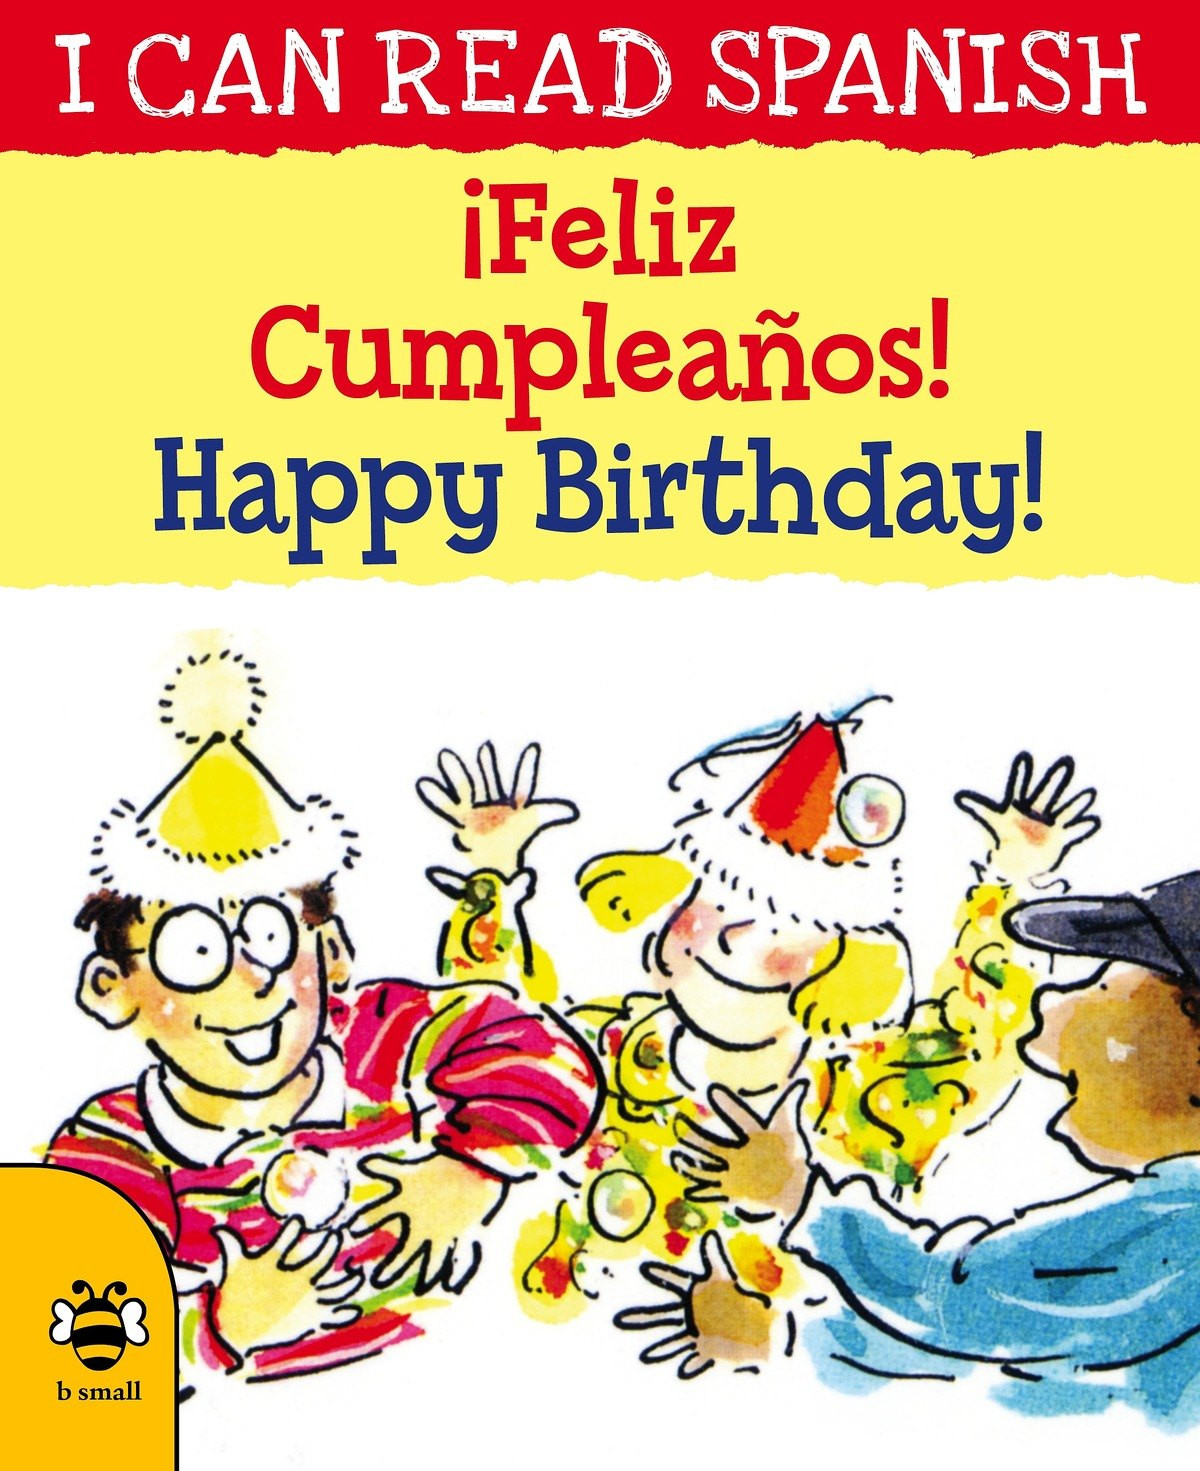 Funny Birthday Greetings In Spanish The Cake Boutique